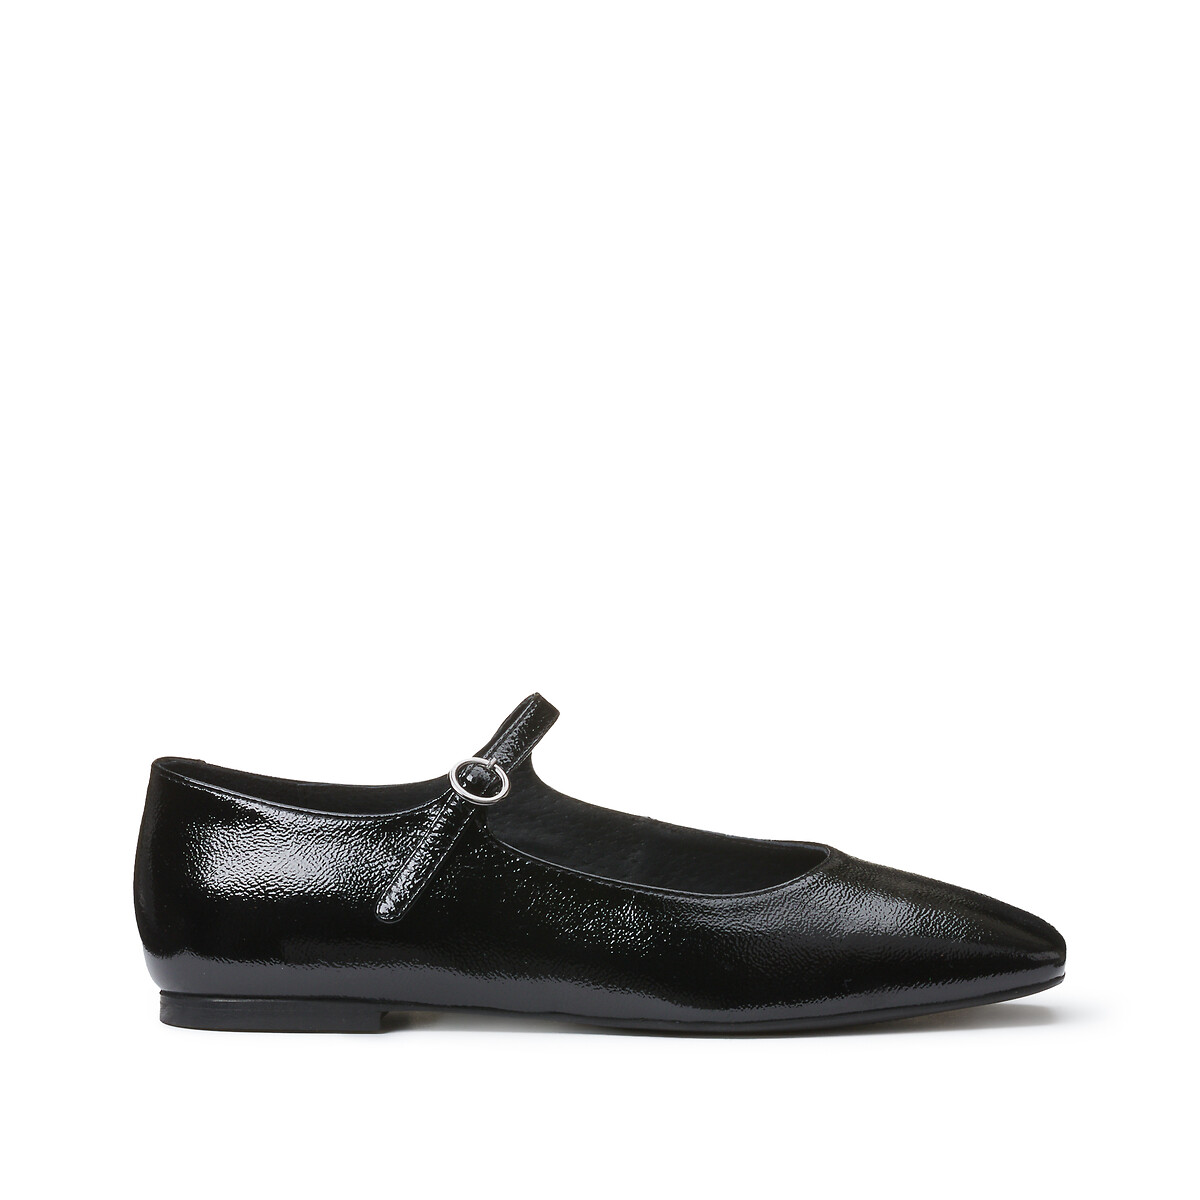 Patent strappy ballet flats in leather, black, La Redoute Collections ...